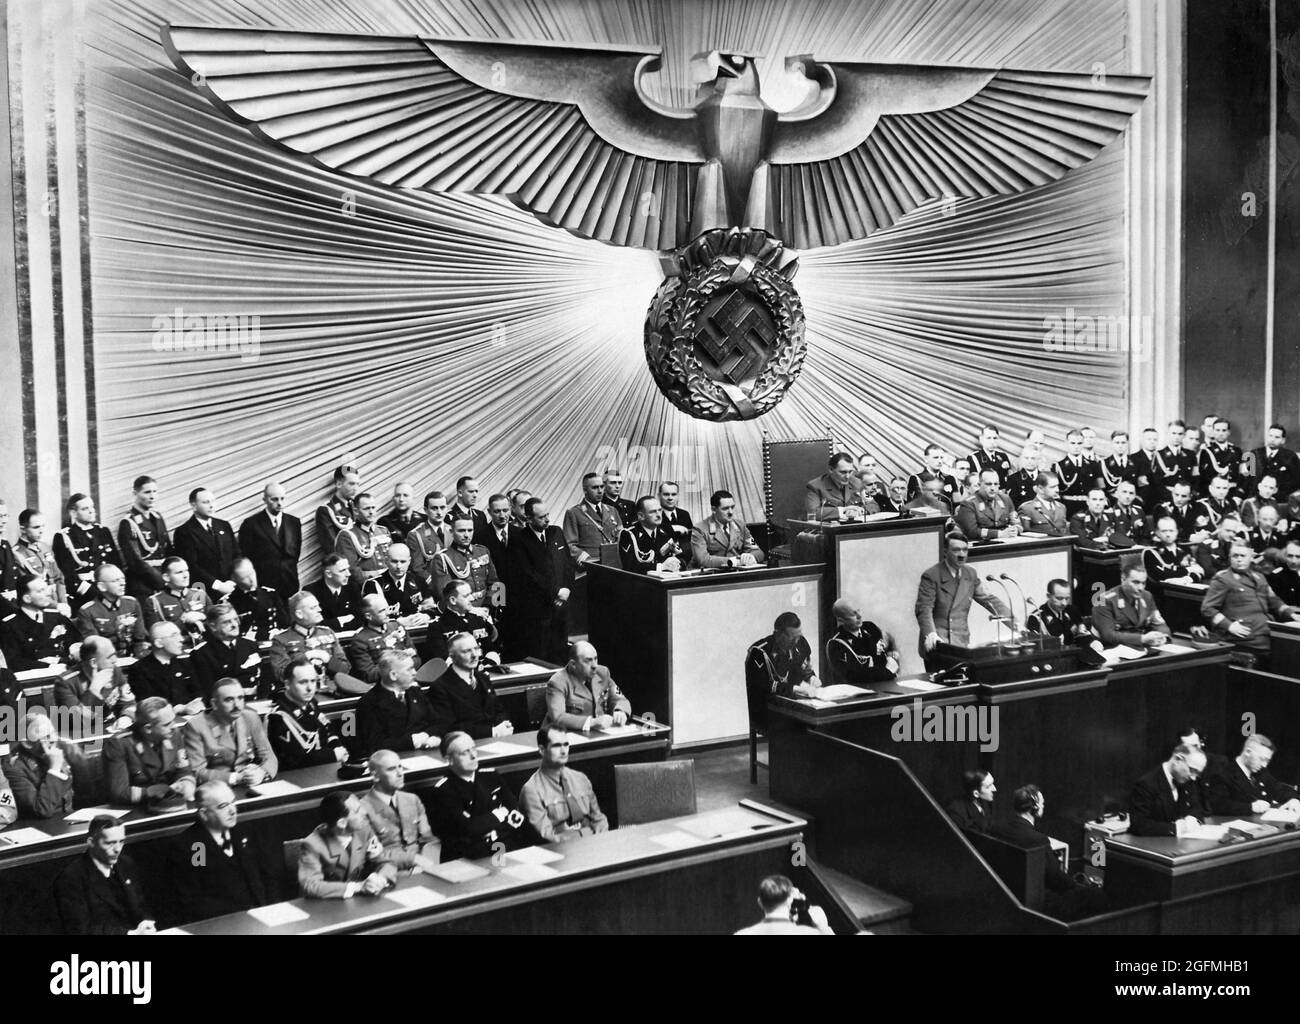 Adolf Hitler making his famous January 30 1939 speech in the Reichstag in which he 'predicted' that the Jews would start a world war and that they would be annihilated in Europe. Credit: German Bundesarchiv Stock Photo